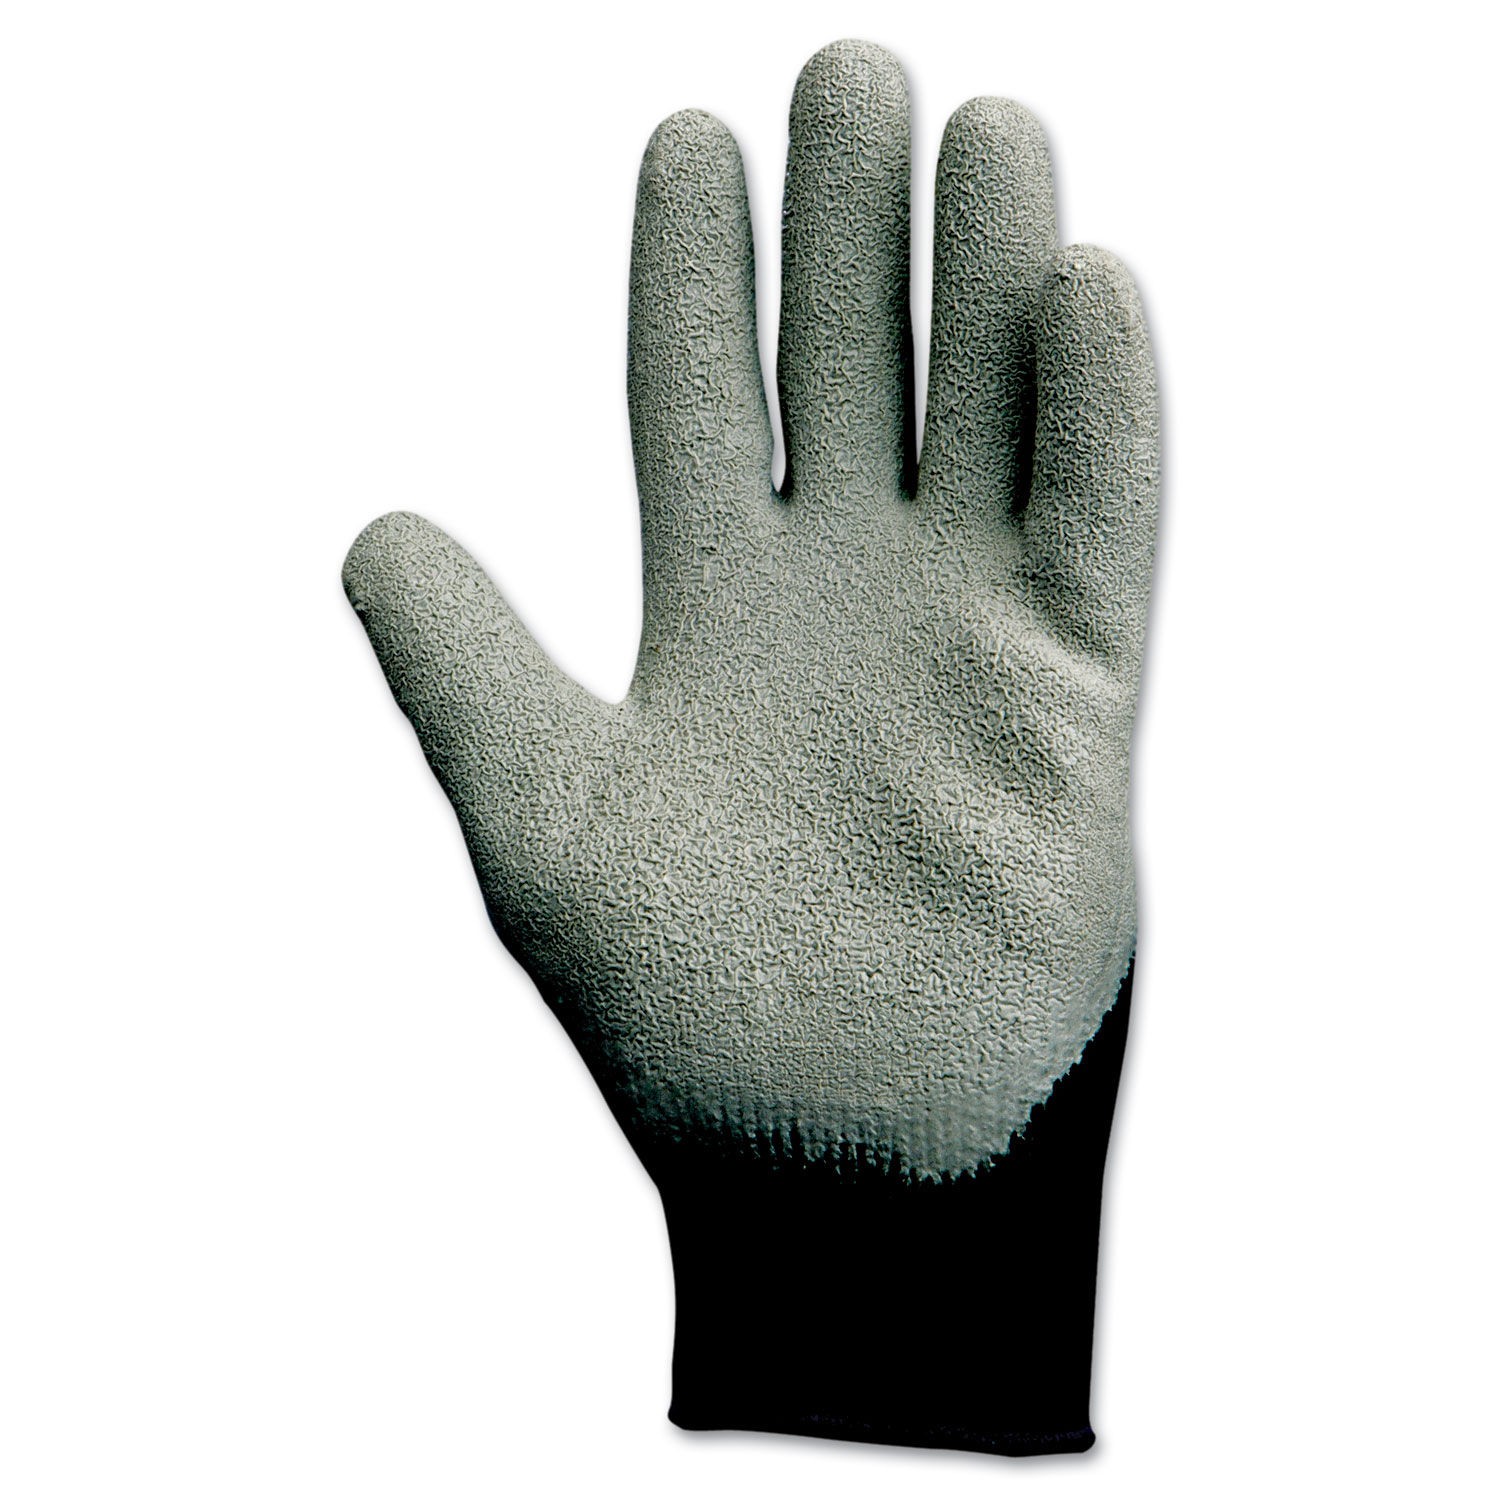 Kleenguard G40 Latex Coated Poly-Cotton Gloves, Large/Size 9, Gray, 12 Pairs/Box